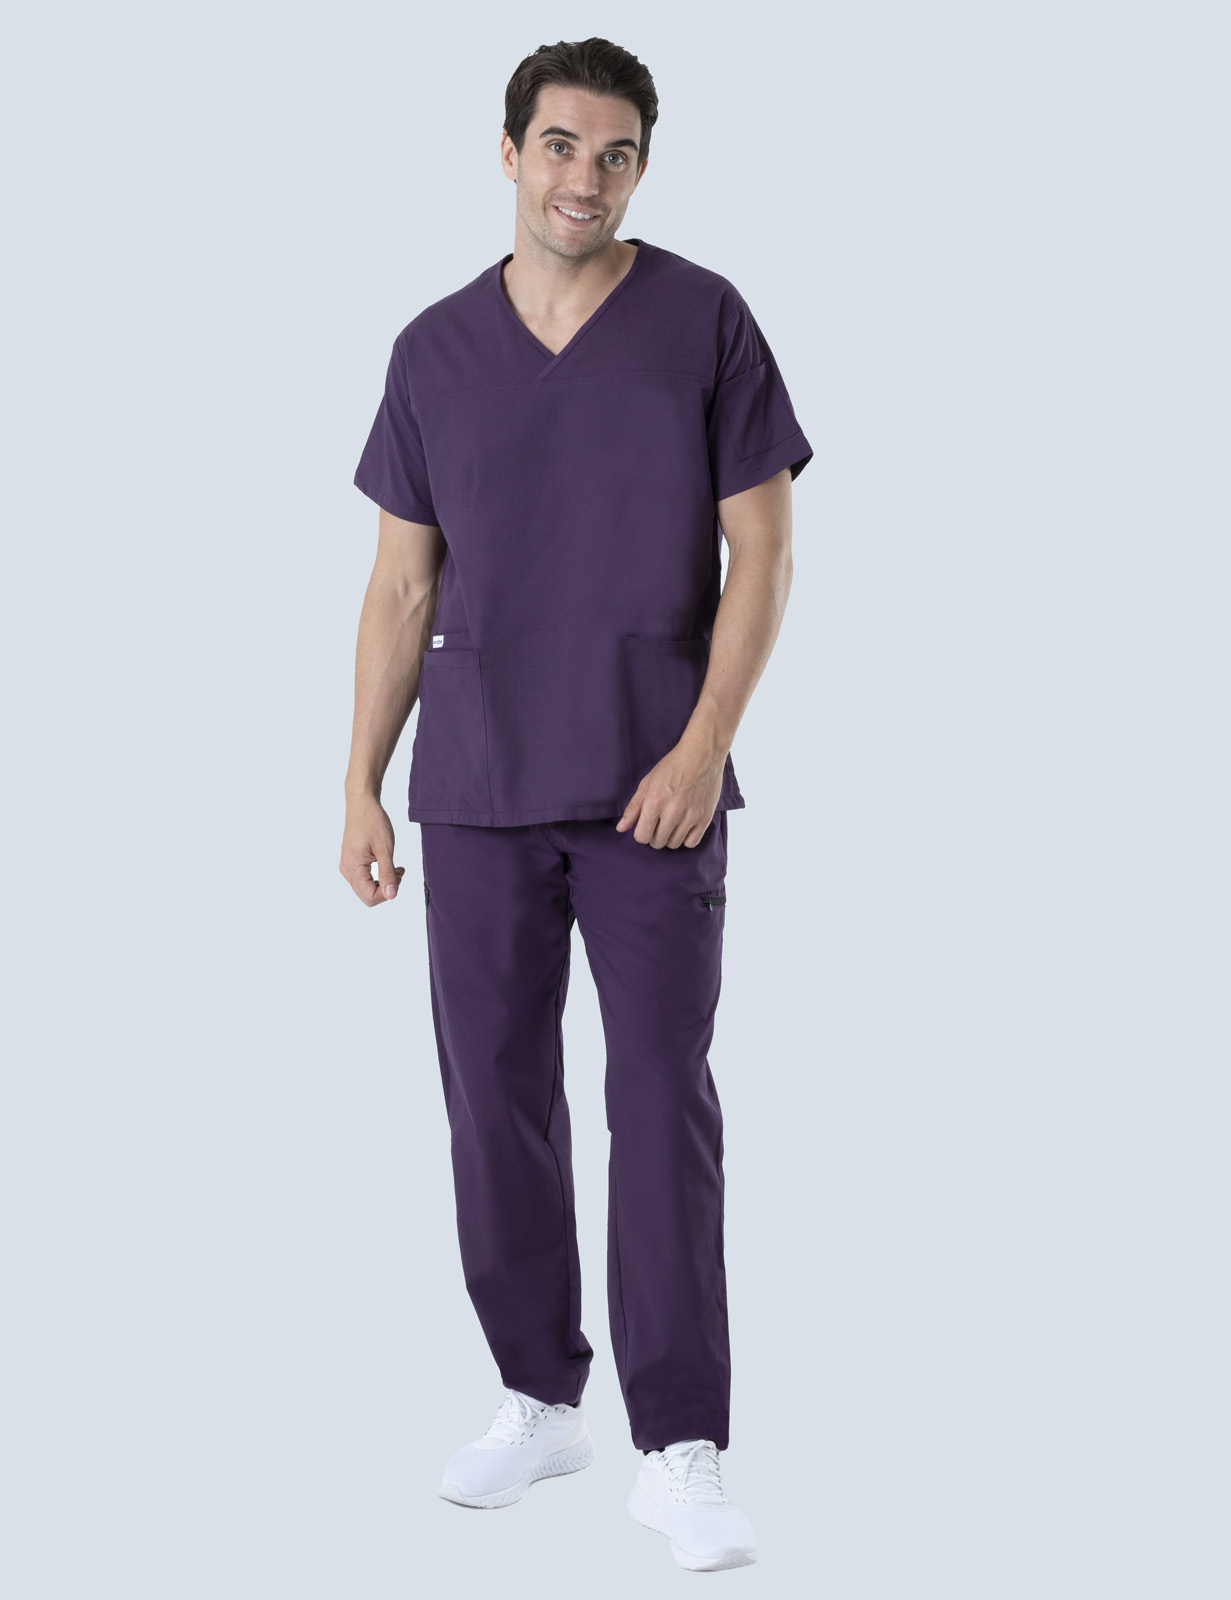 Townsville Hospital Pharmacy Uniform Top Only Bundle) Men's Fit Solid in Aubergine incl Logos)